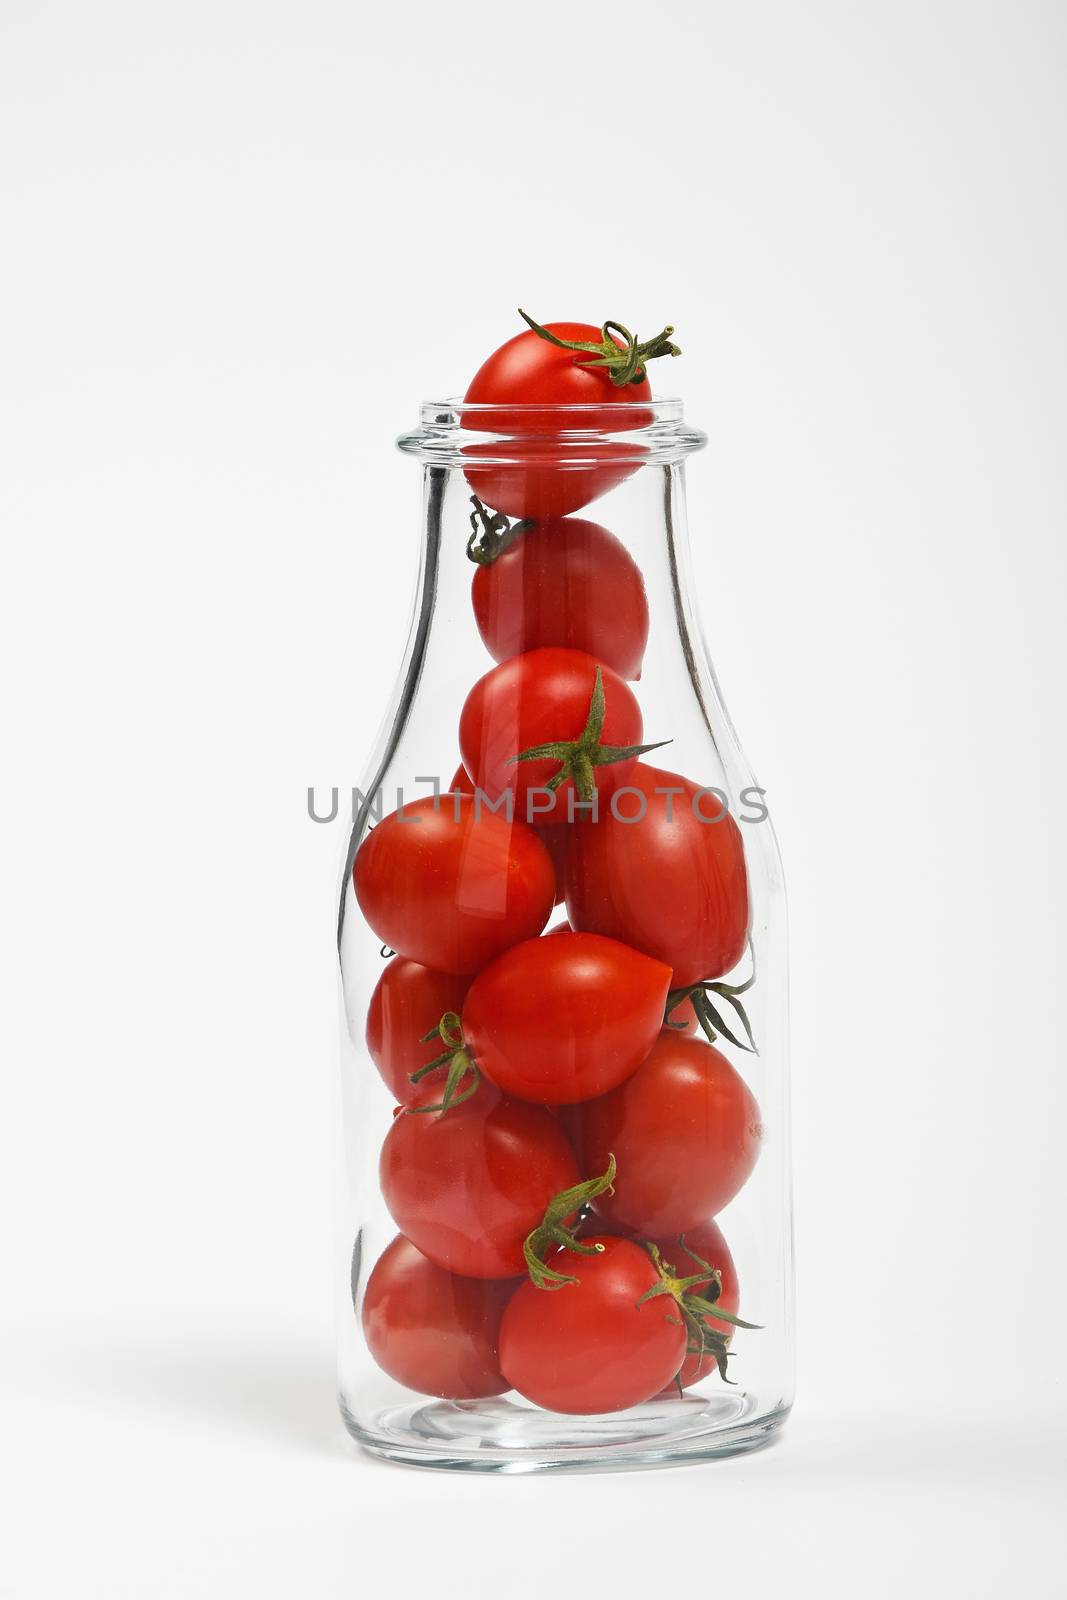 Big glass bottle full of cherry tomatoes over white background as symbol of fresh natural organic juice or ketchup